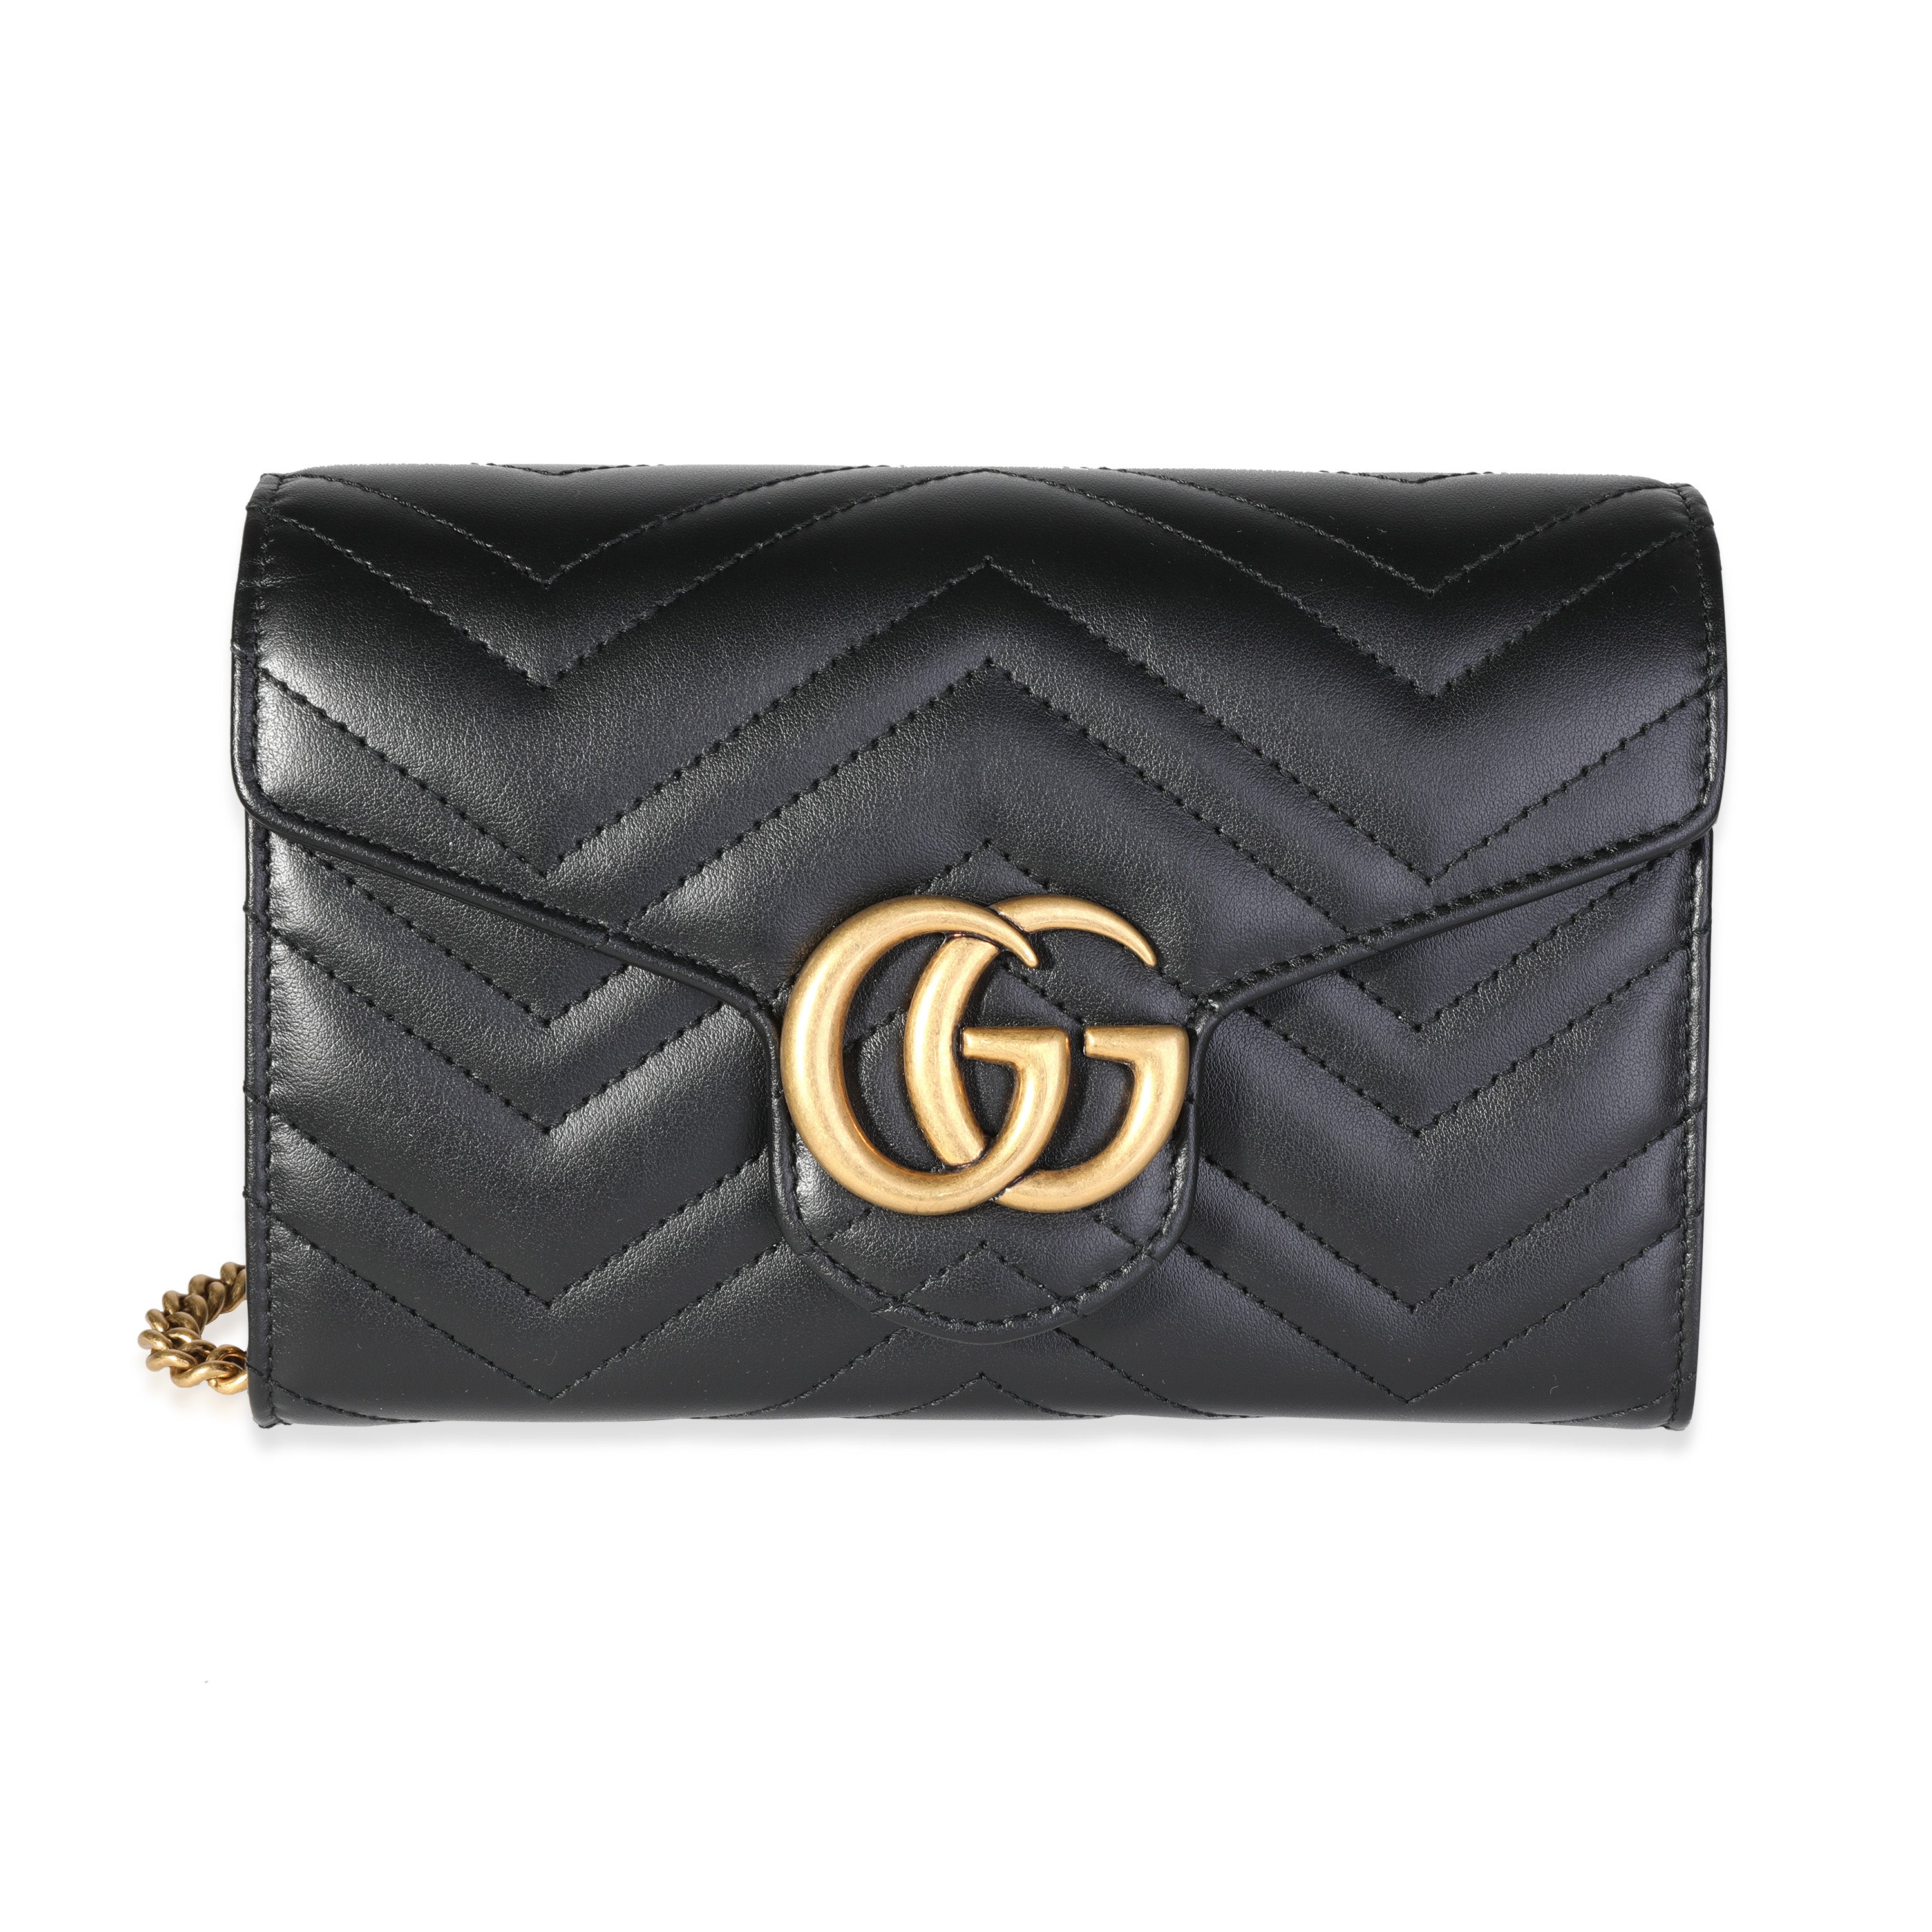 Gucci, Bags, New Authentic Gg Gucci Logo Black Velvet Pouch Purse  Cosmetic Bag Embossed Rare